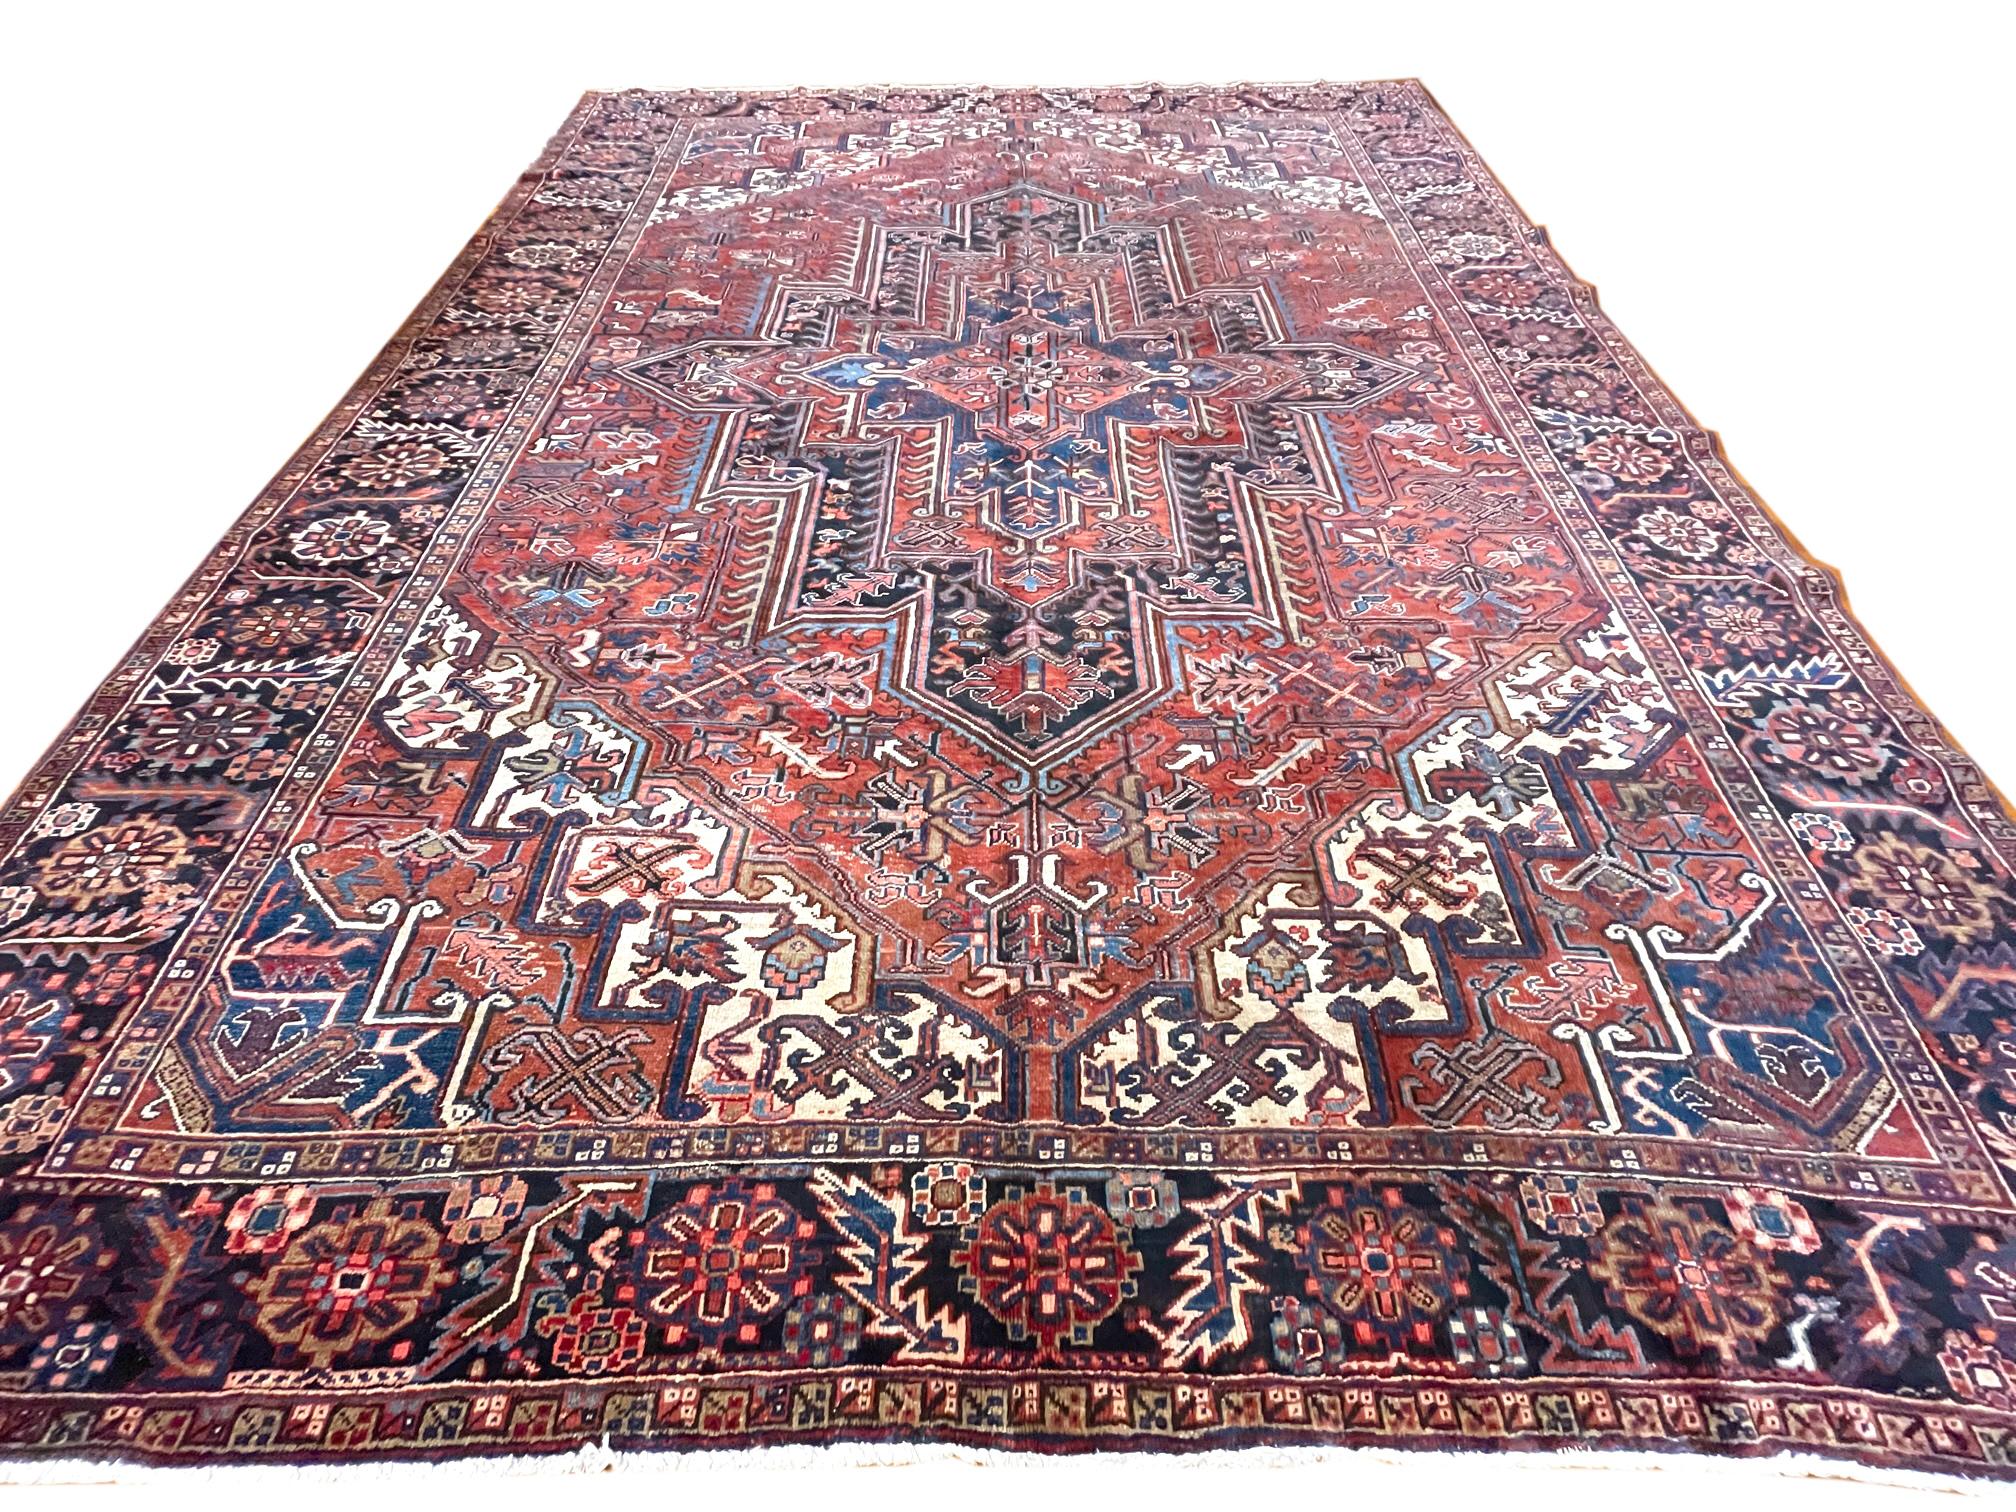 This Persian Tabriz-Heriz rug, Heriz rugs are Persian rugs from the area of Heriz, East Azerbaijan in northwest Iran, northeast of Tabriz. This rug has wool pile and cotton foundation, double hand knotted with a great condition for its age (both